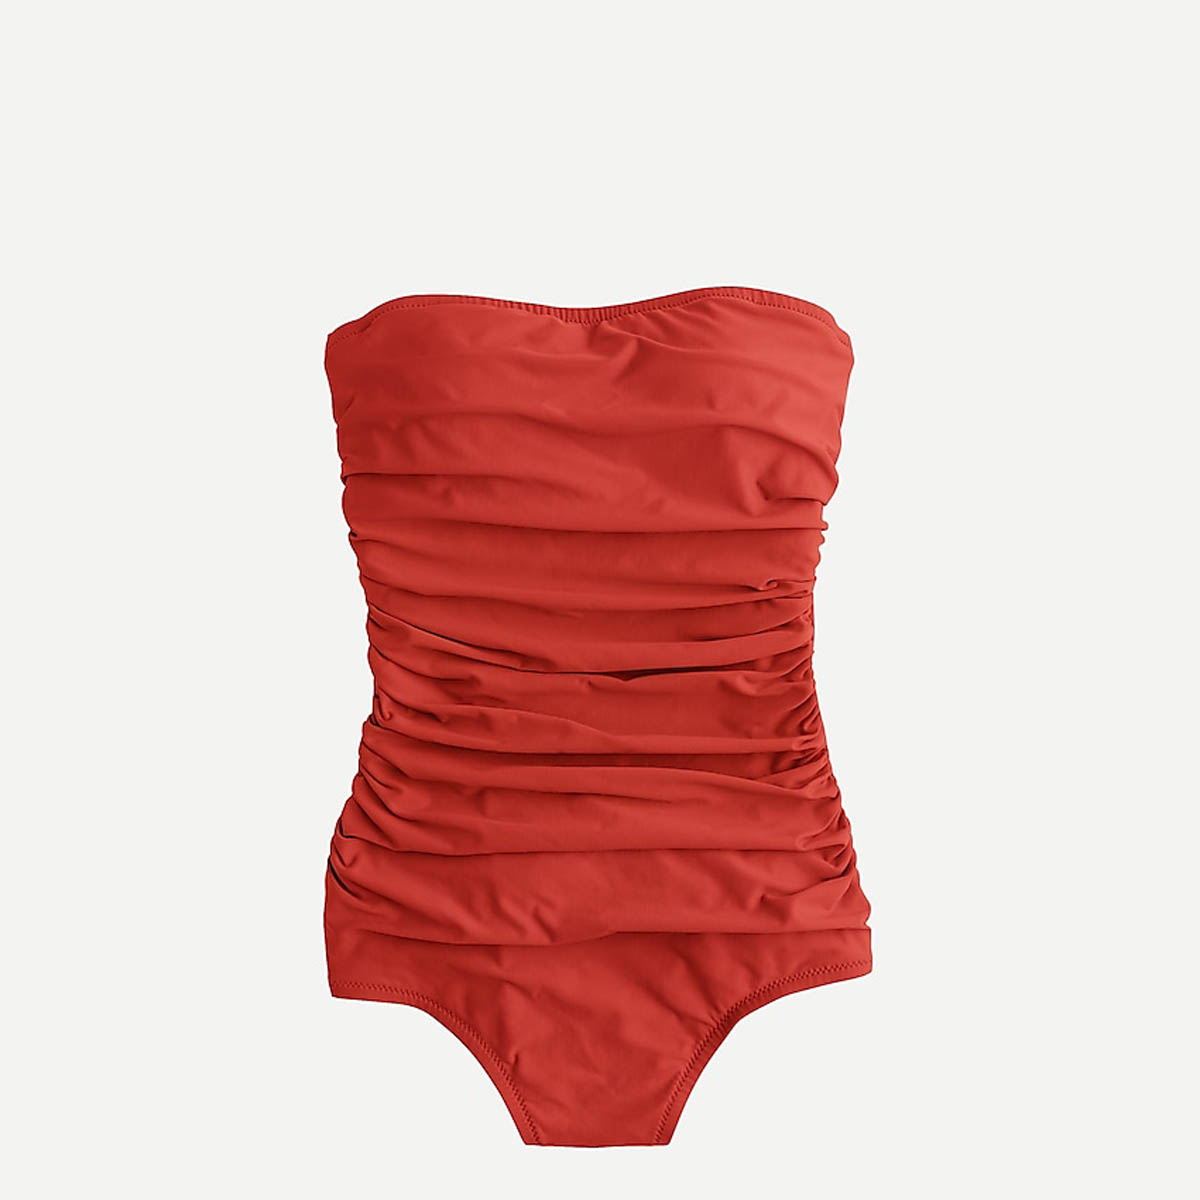 Our Go-To Flattering Swimsuits Red Ruched bandeau one-piece swimsuit